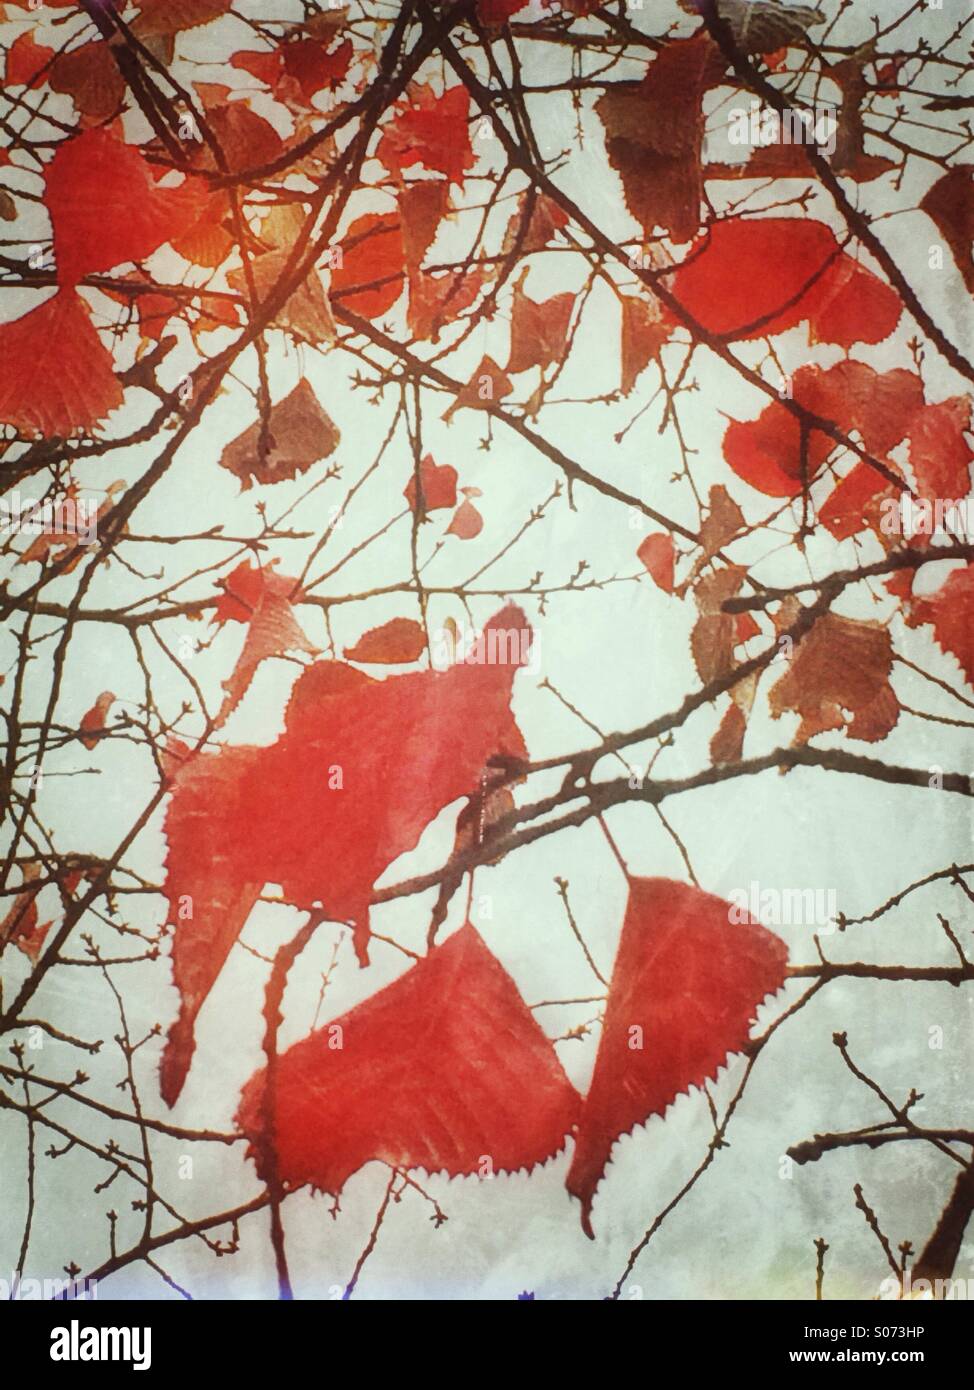 Red leaves on branches Stock Photo